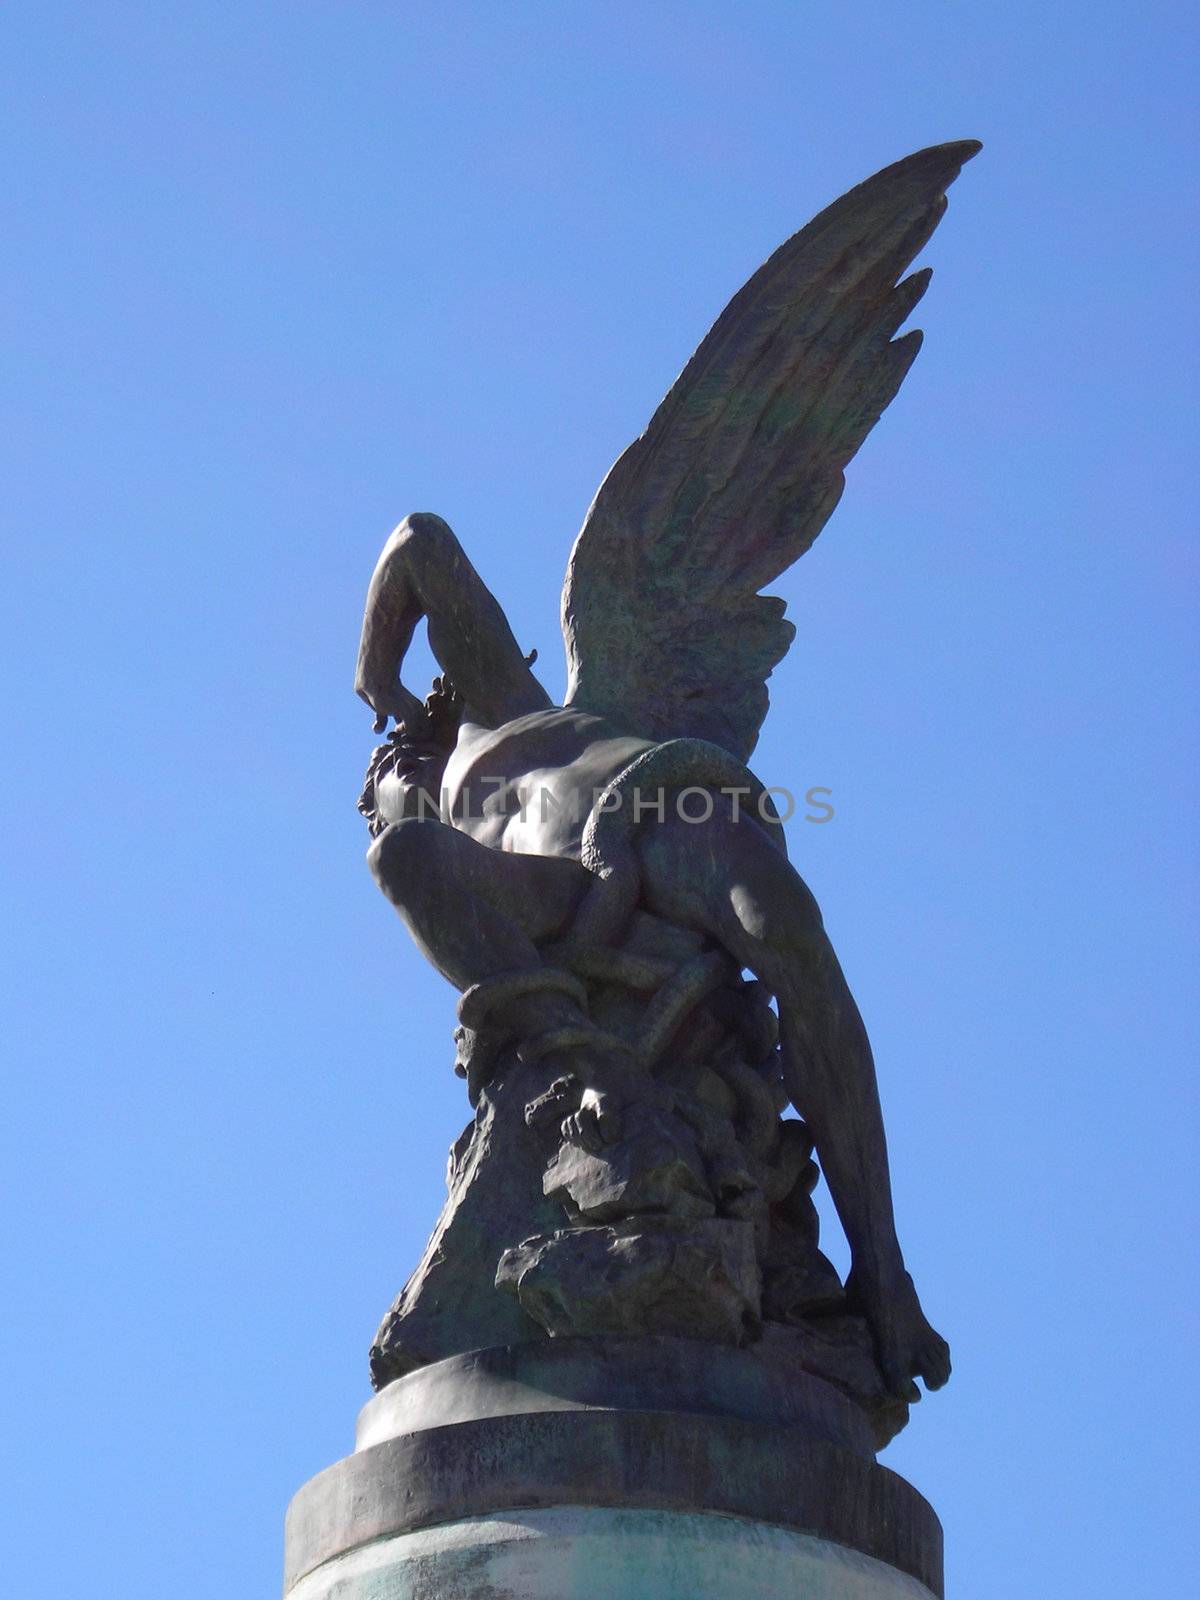 Bottom view of the only one statue in the world dedicated to the devil, located in the Retiro Gardens in Madrid.